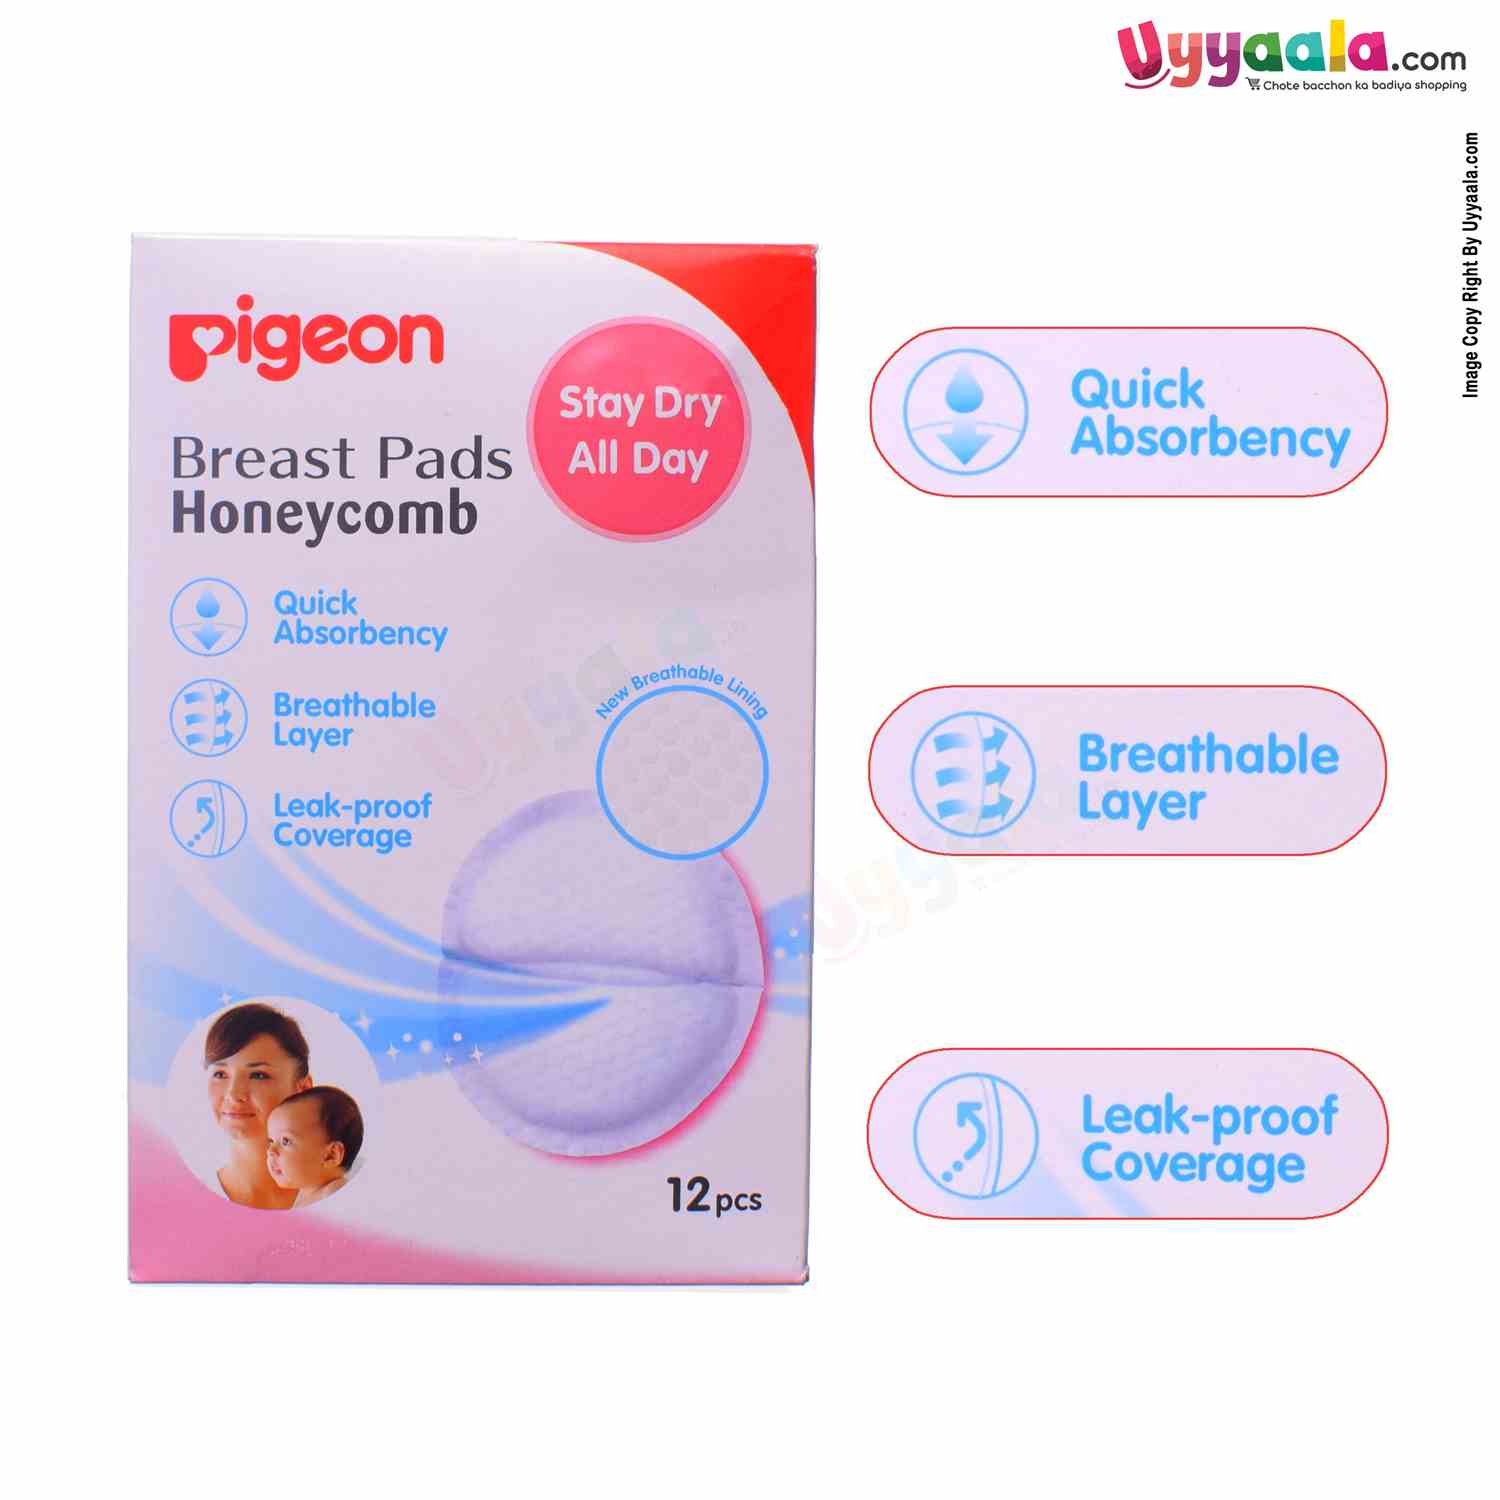 Pigeon Breast Milk Pads Honeycomb Quick Absorbency Breathable